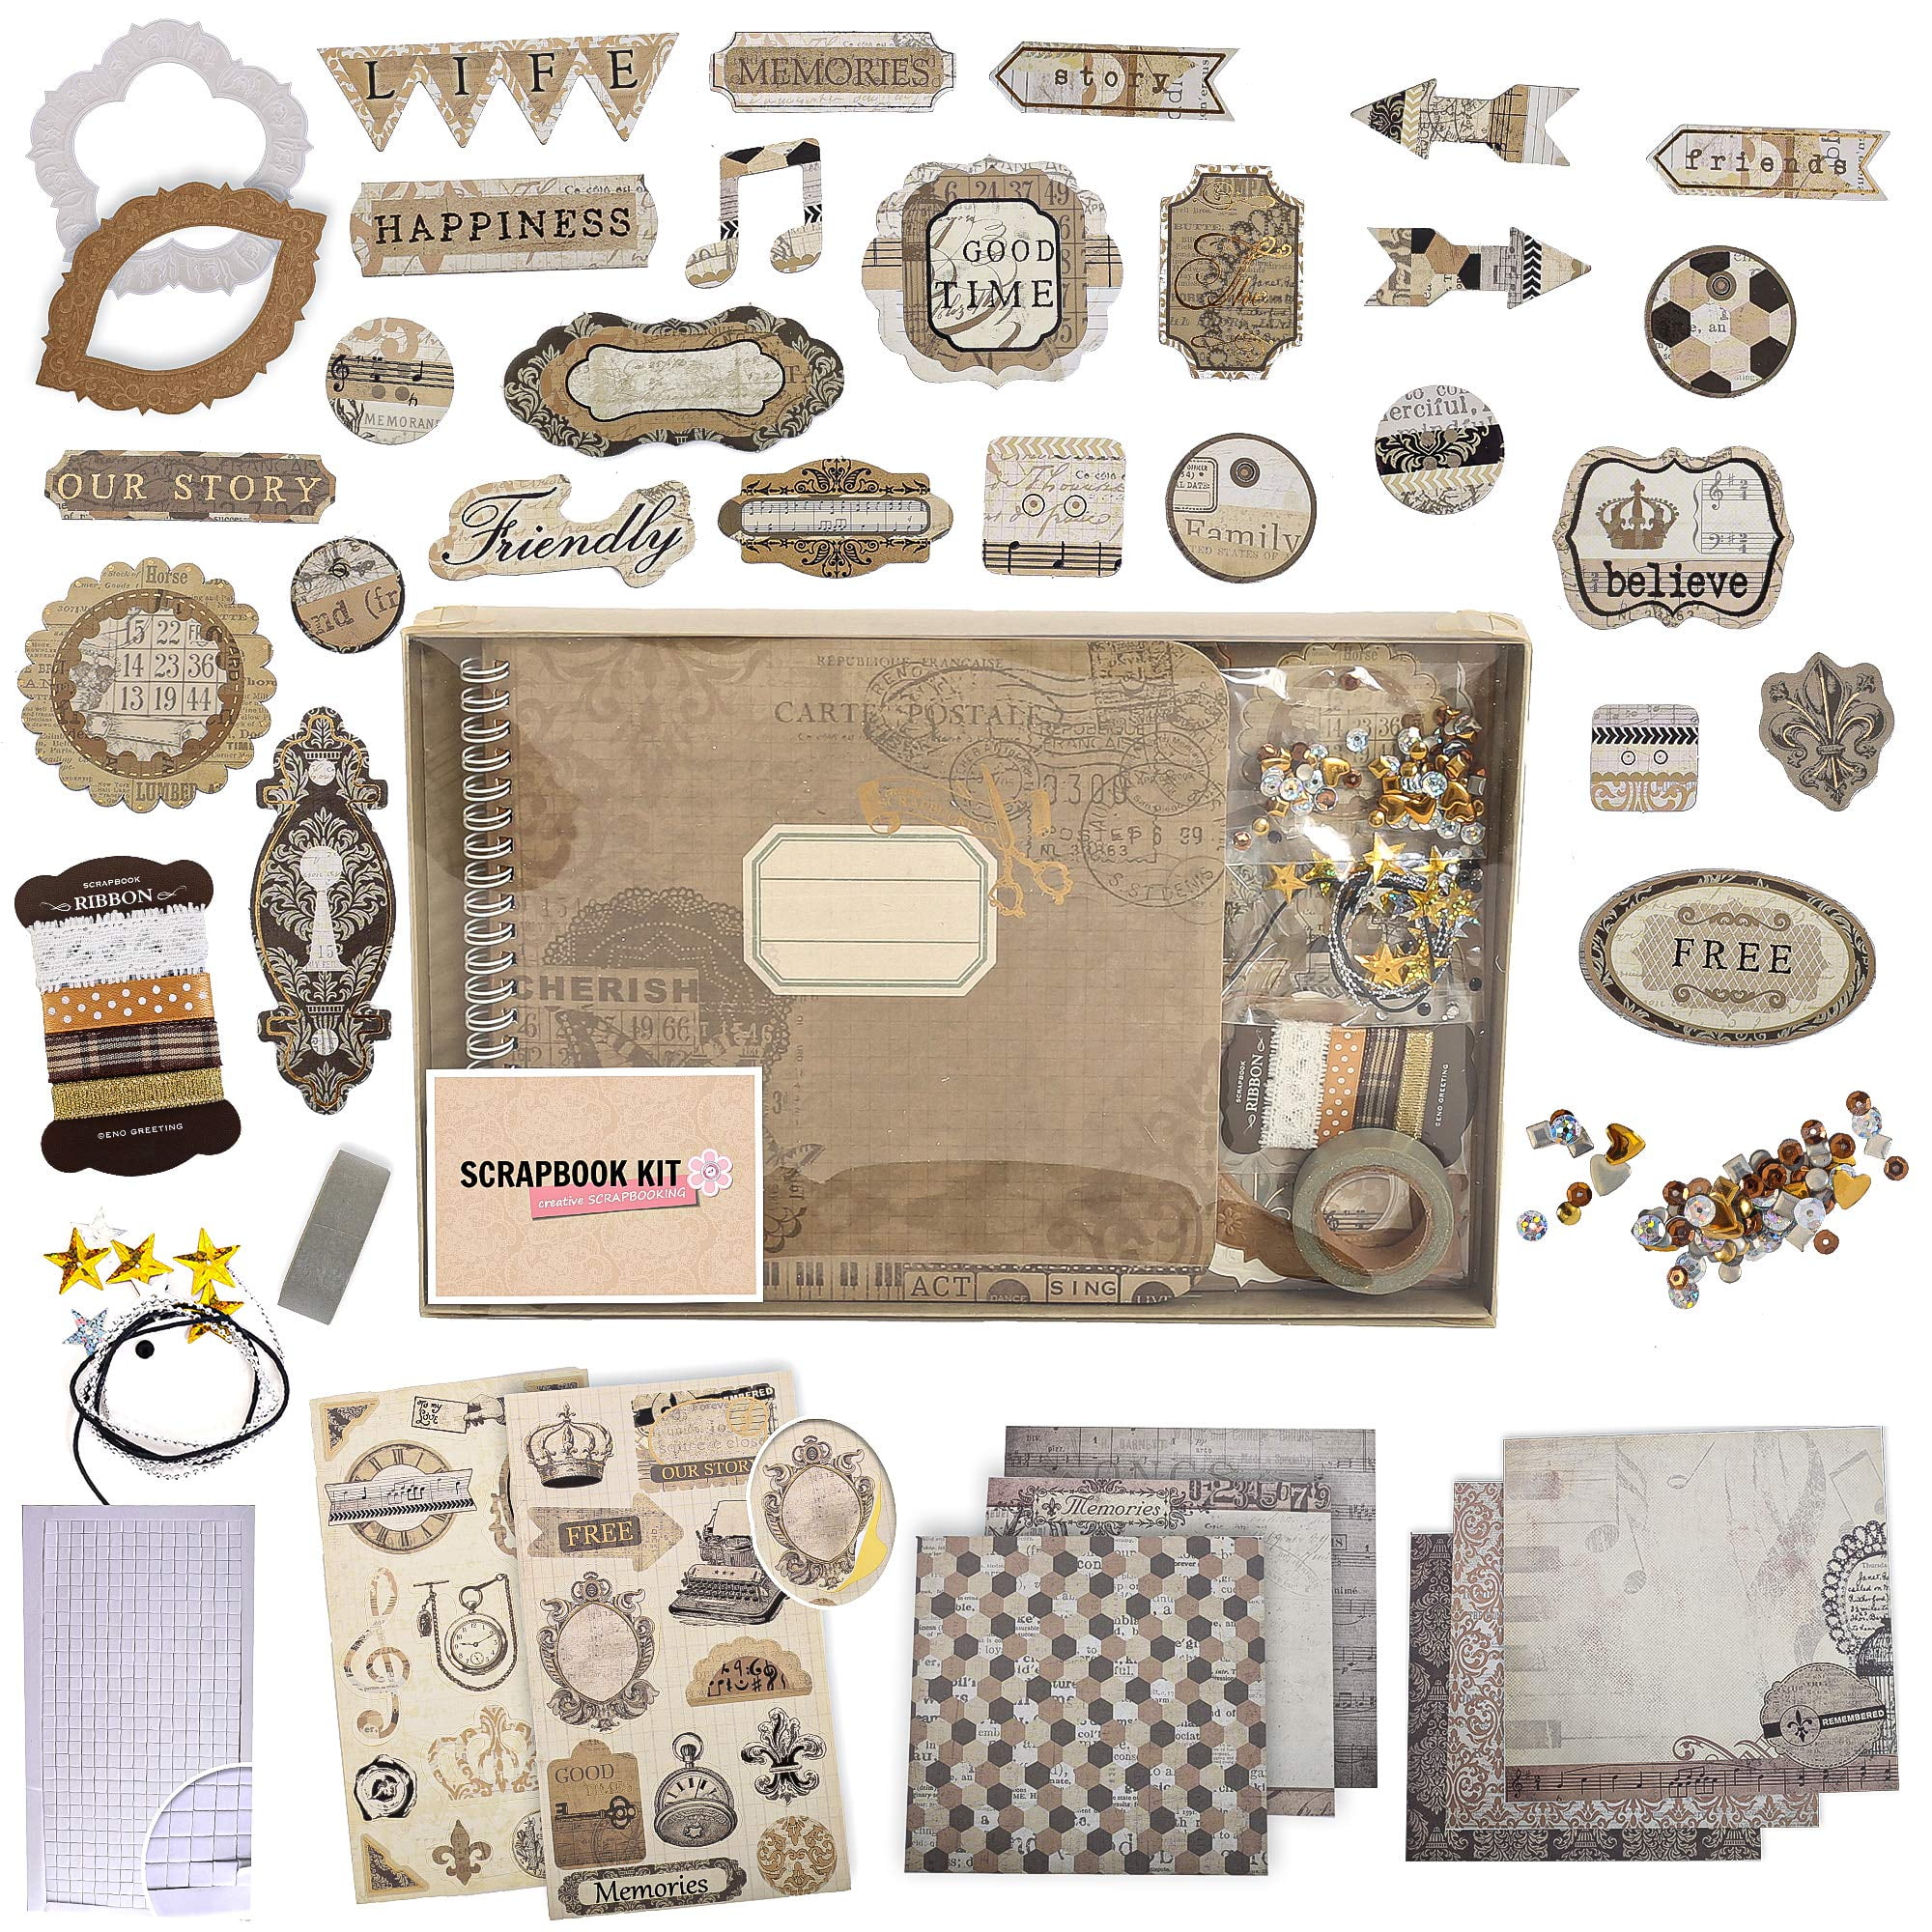 PICKME's D.I.Y Vintage Scrapbook Kits for Adults & Kids, Hardcover  Coil-Bound Scrapbook Album Including Stationery Set with Gold Embossed  Stickers, Ribbons & Journaling Supplies. (7.5 x 8, 100Pc) 